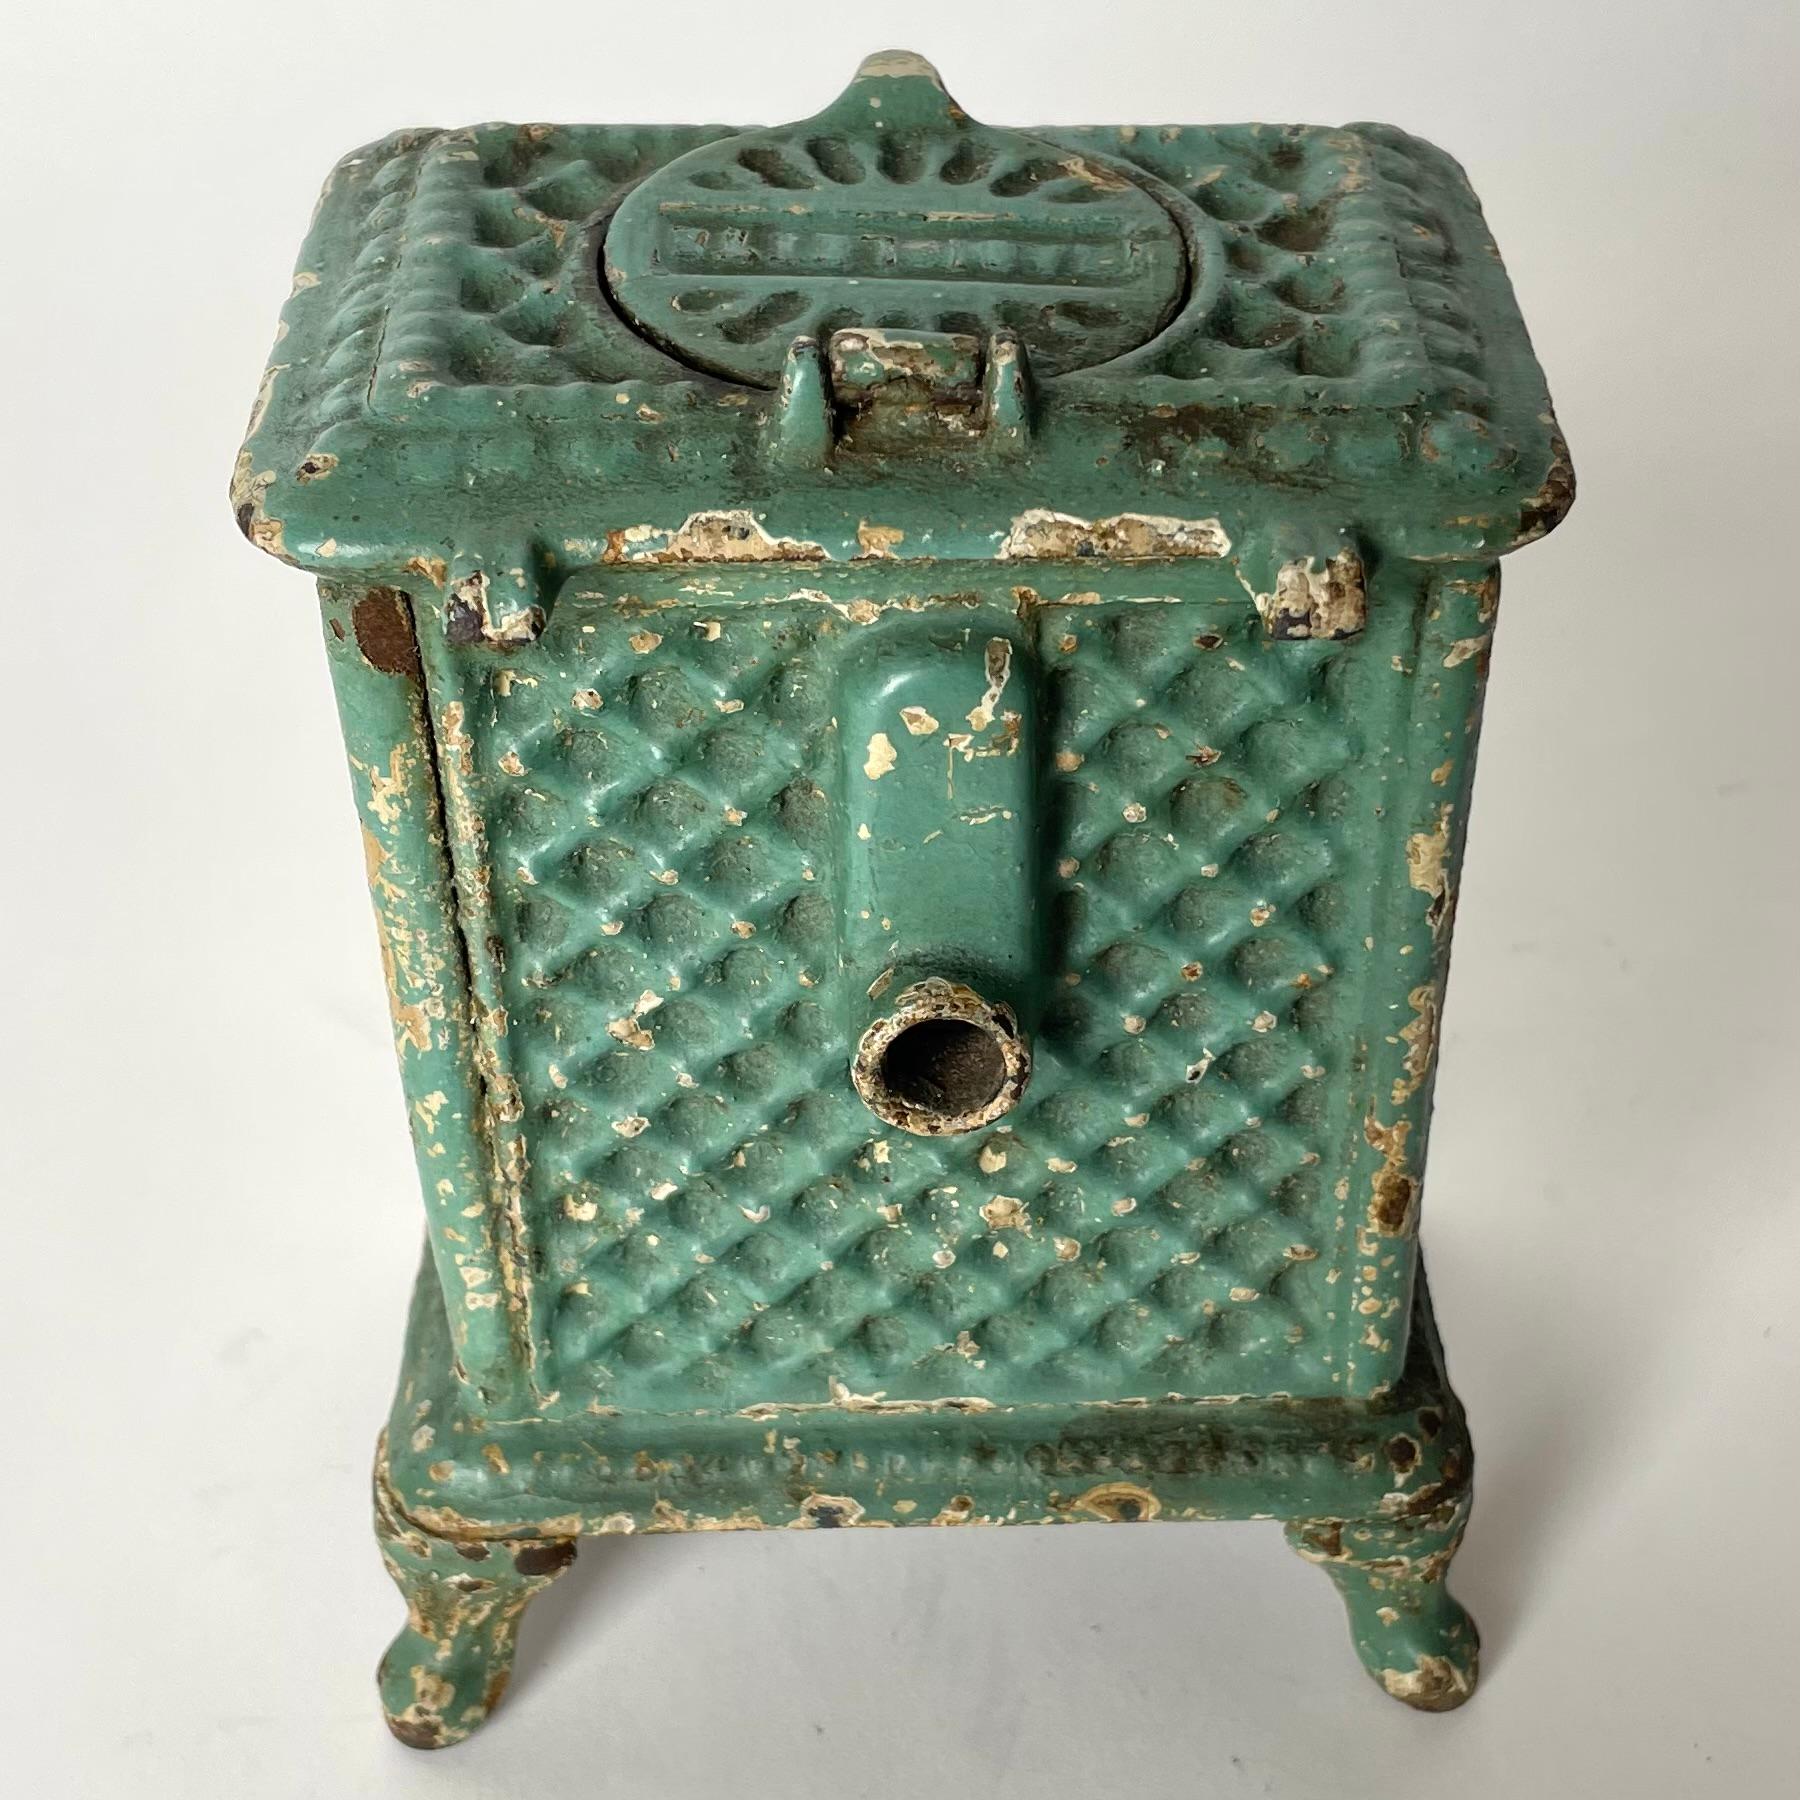 Iron Cool Ink Well designed as a Godin iron stove from the late 19th Century For Sale